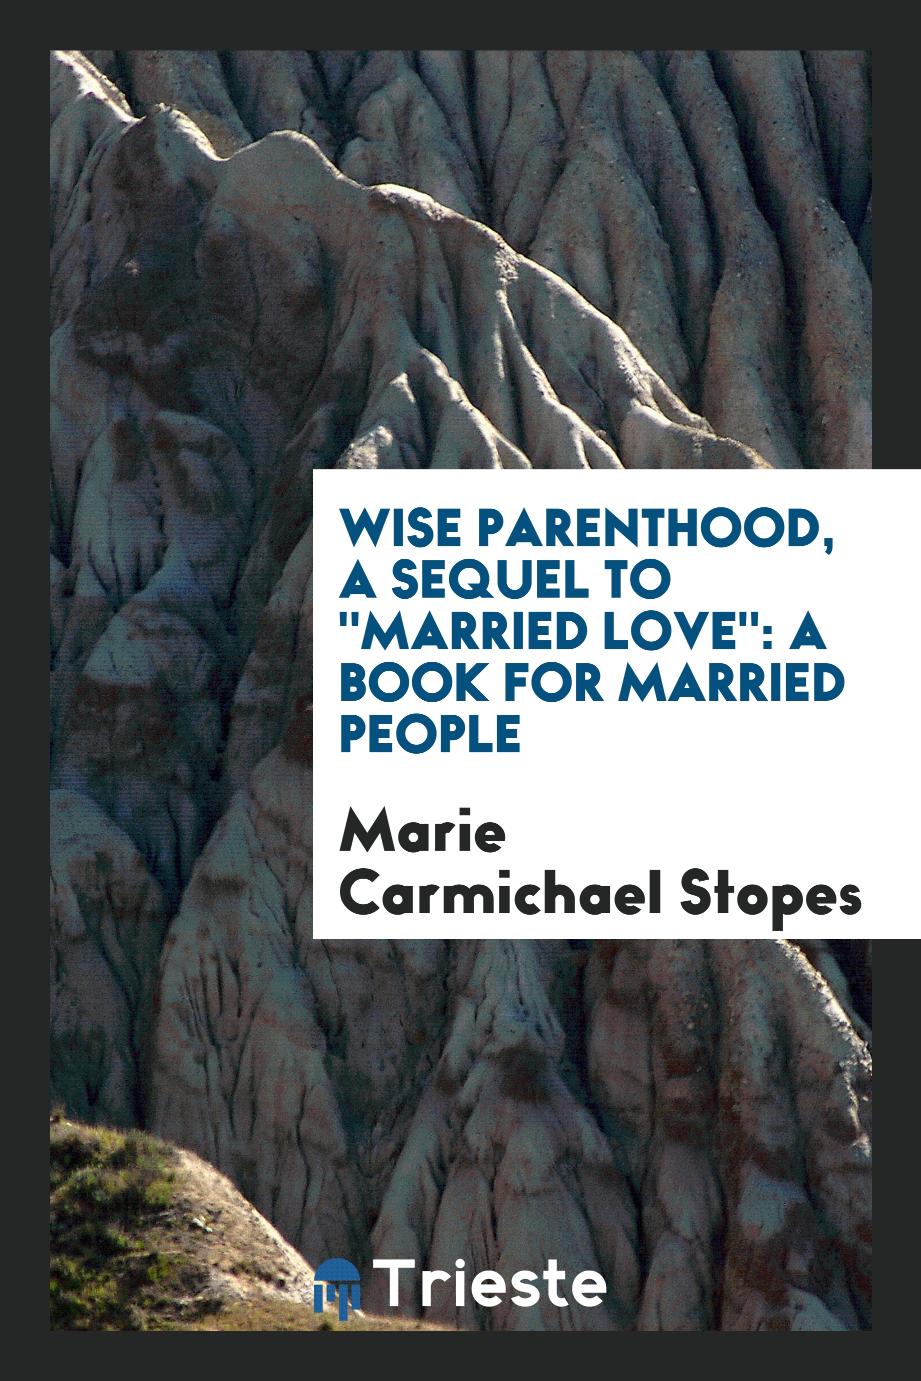 Wise parenthood, a sequel to "Married love": a book for married people